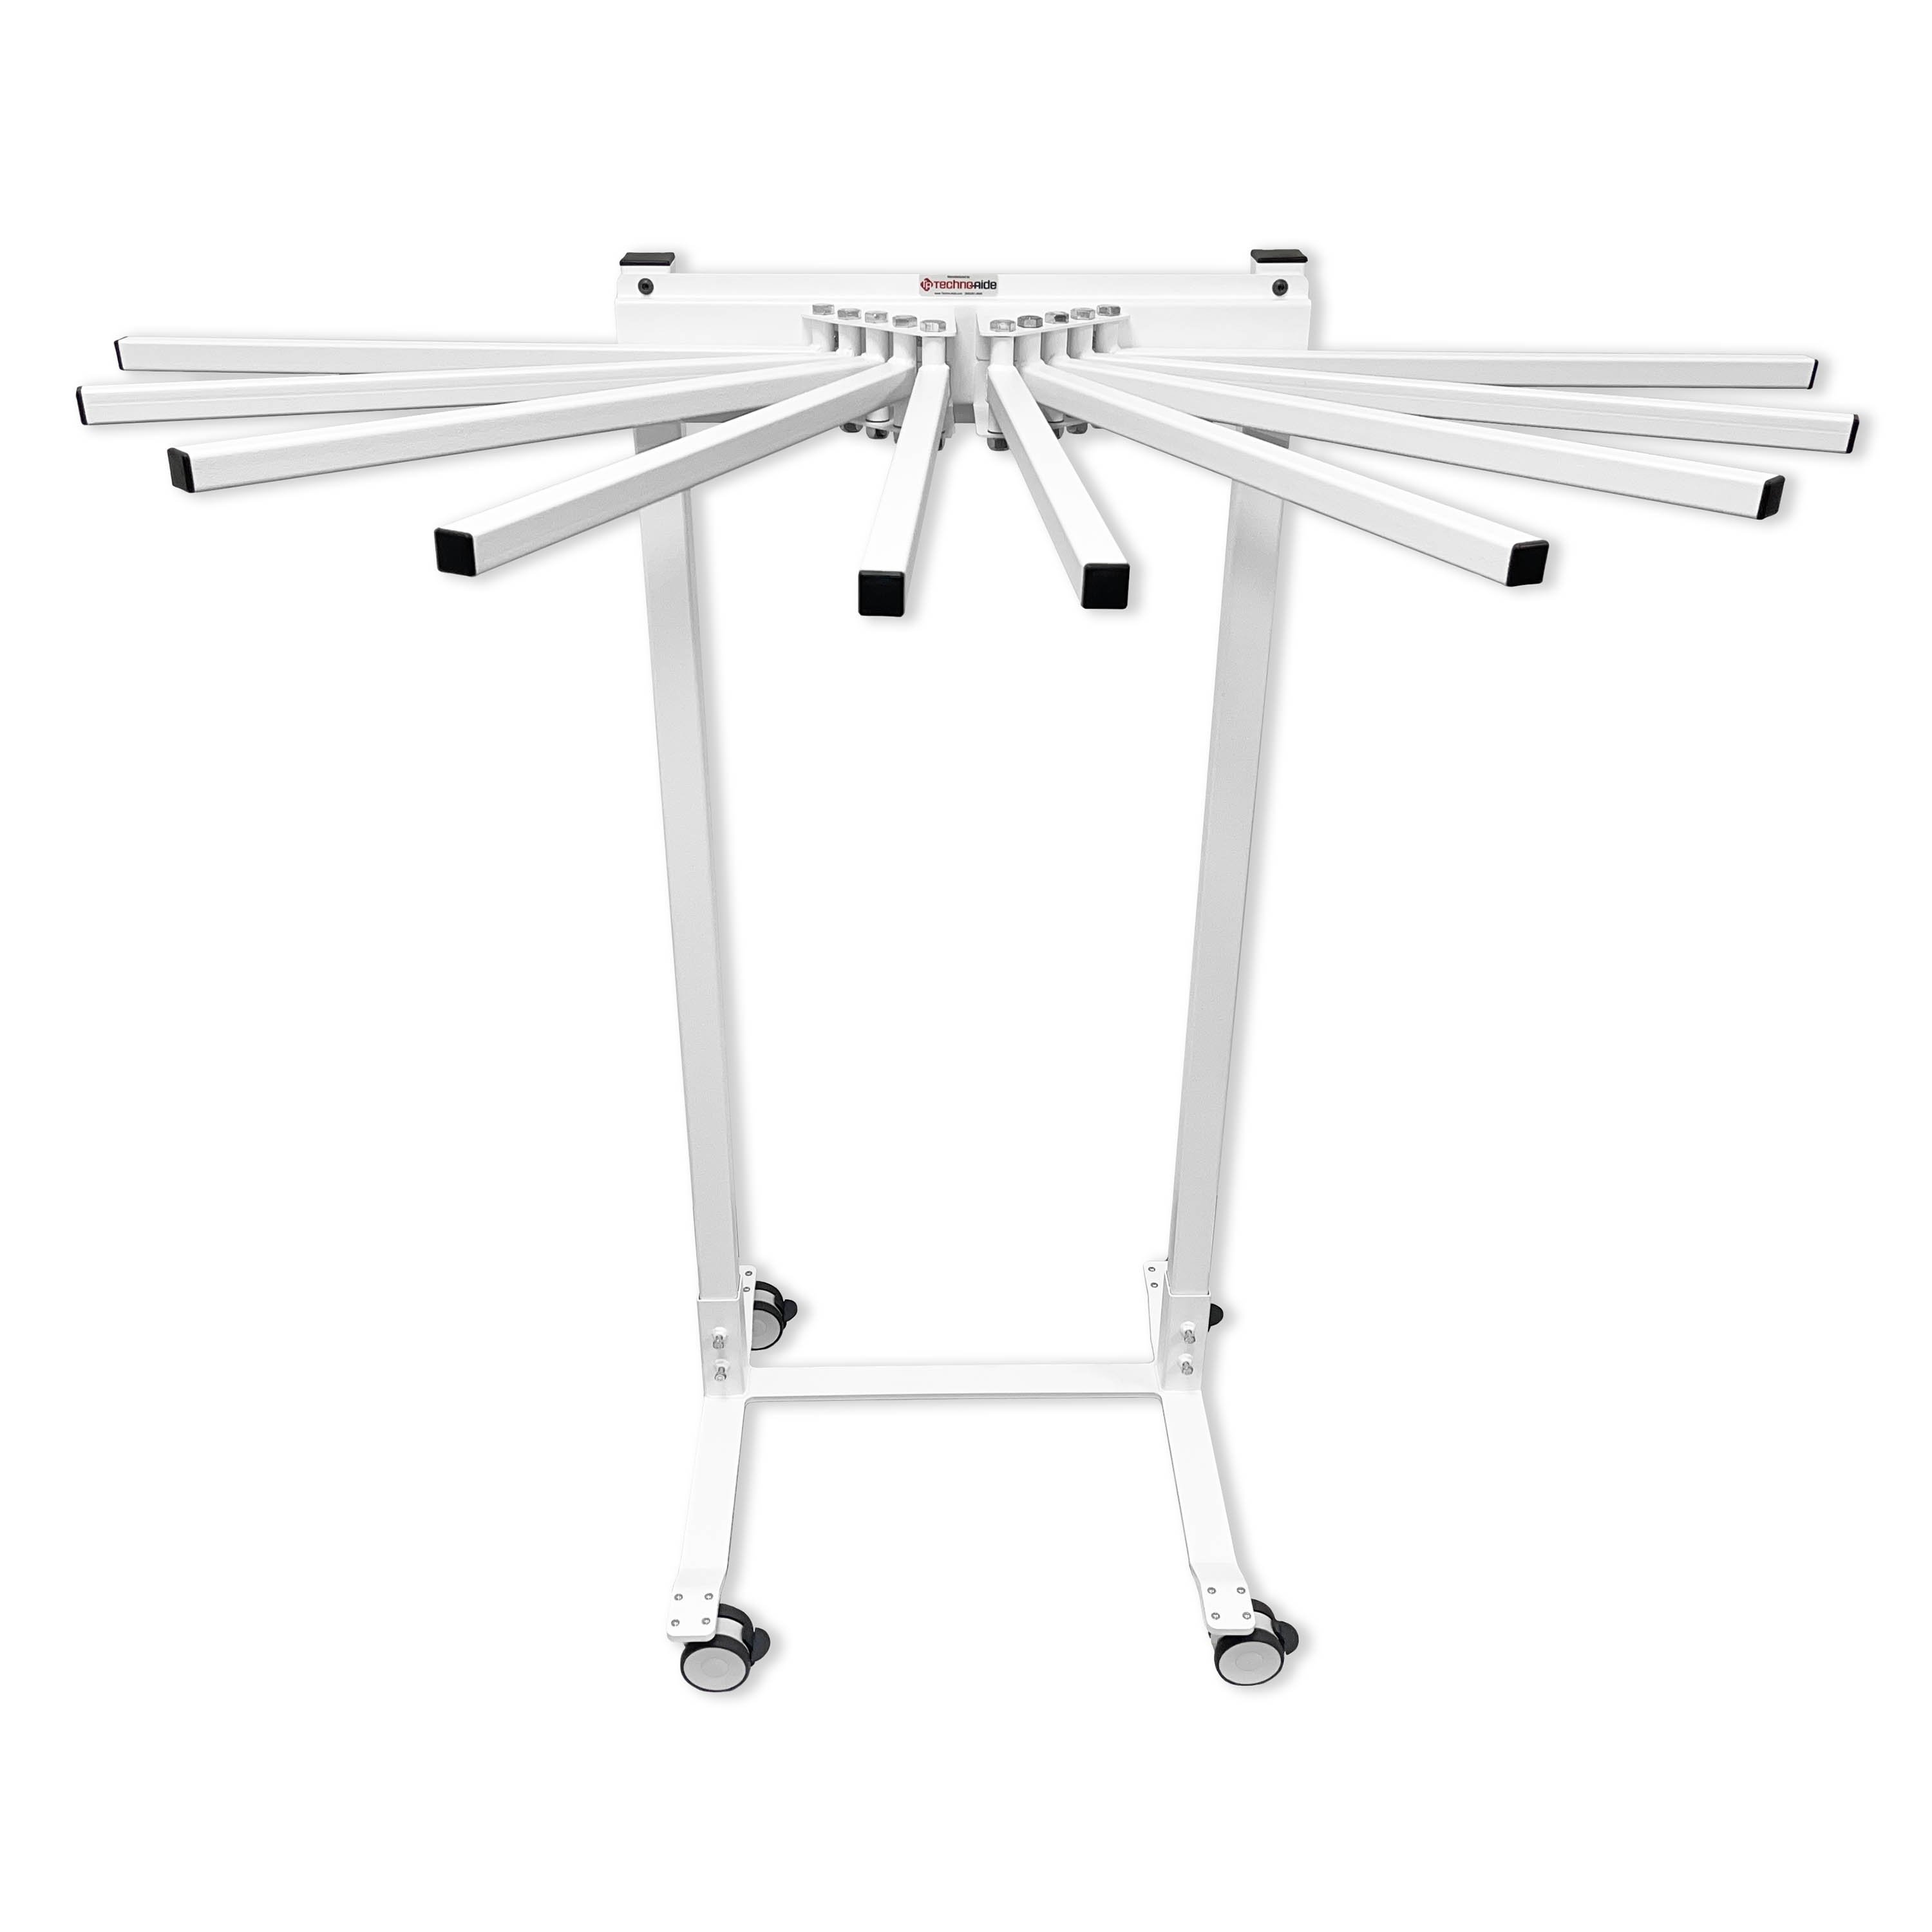 Mobile Swing-Arm Apron Rack - Ten Arms Swing Left & Right